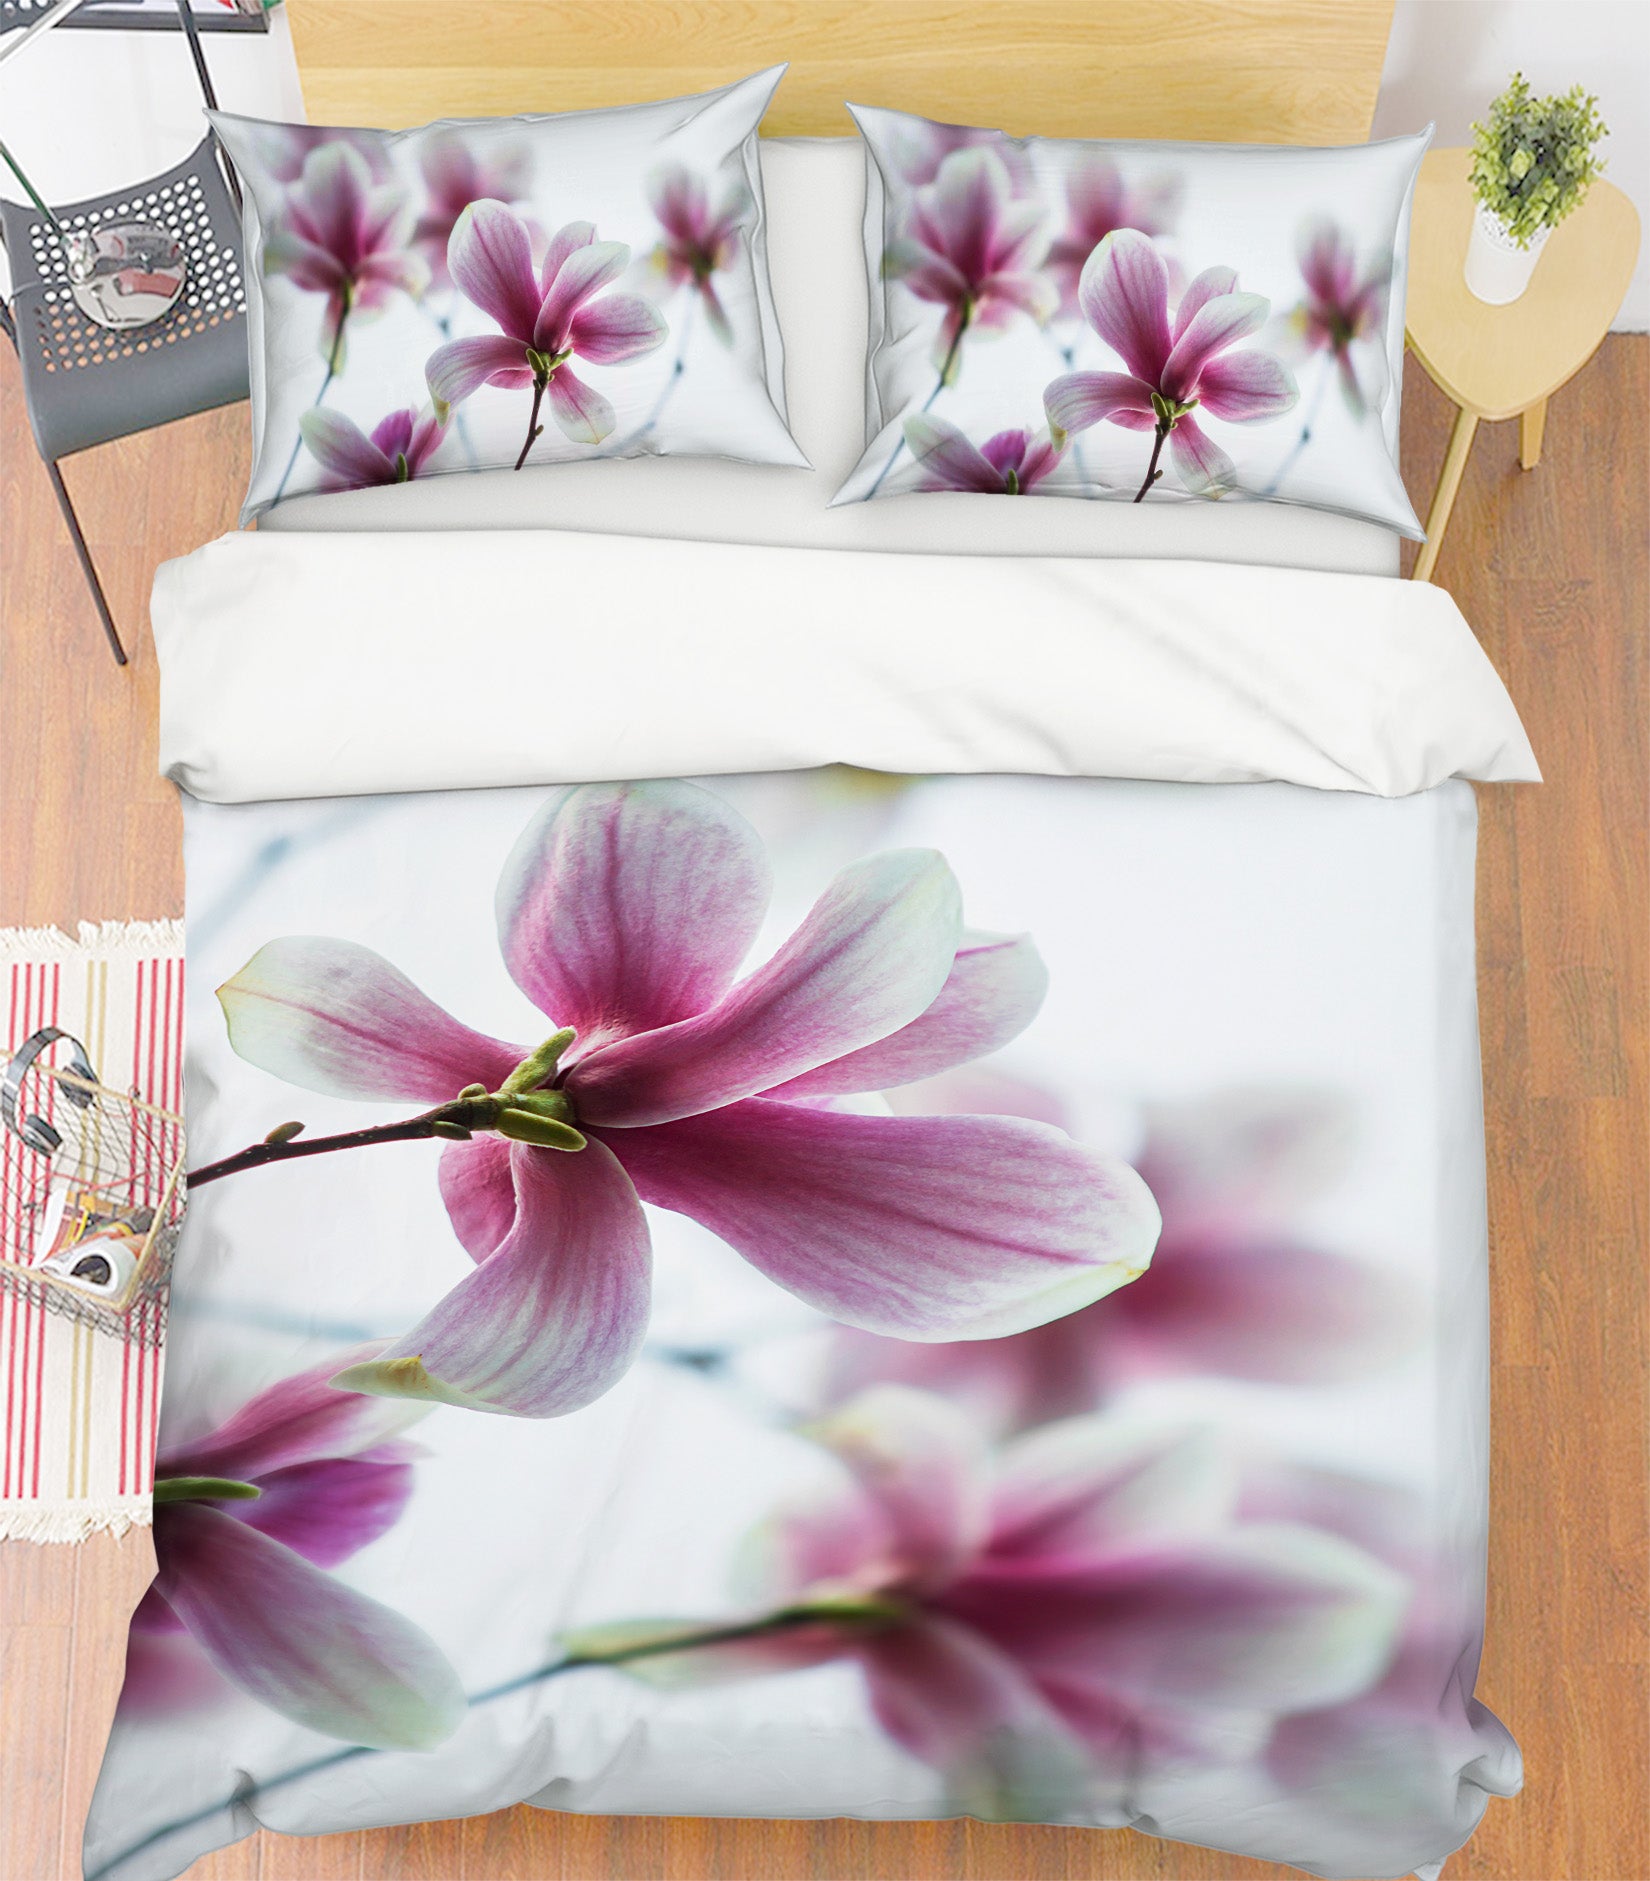 3D Flowers 86018 Jerry LoFaro bedding Bed Pillowcases Quilt